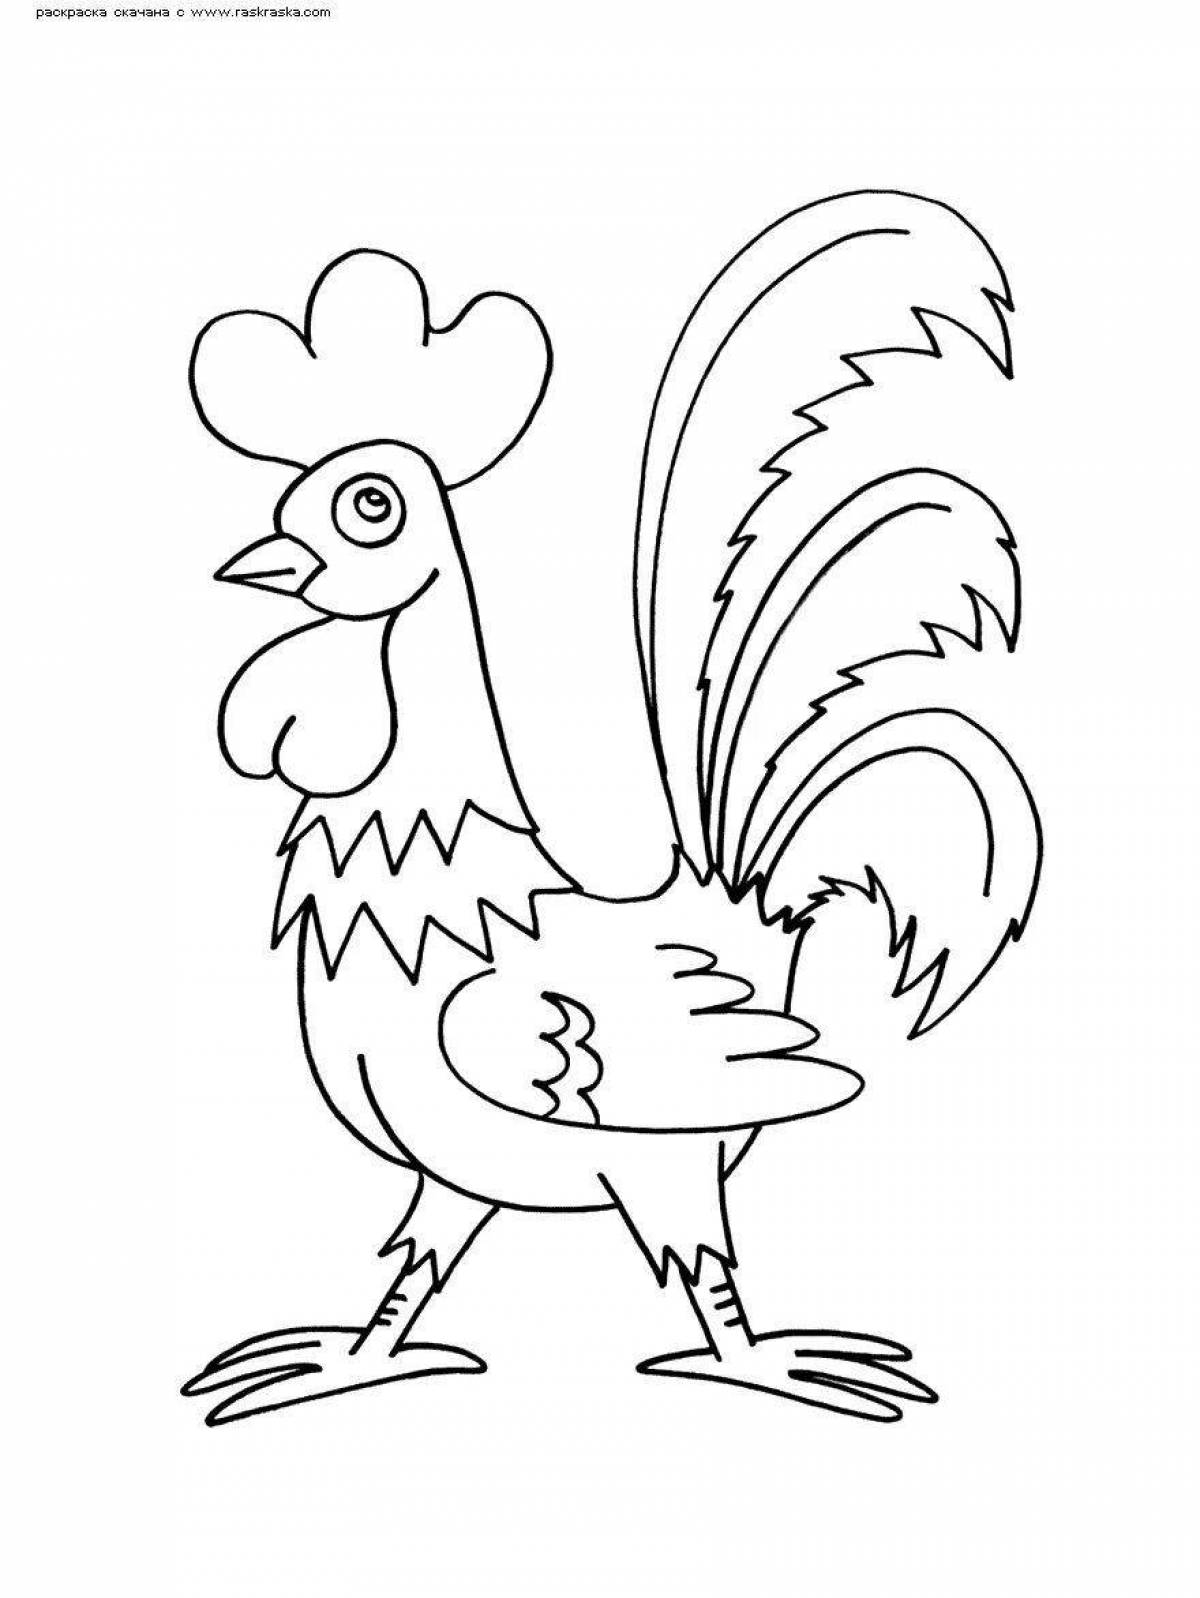 A fun rooster coloring book for 4-5 year olds